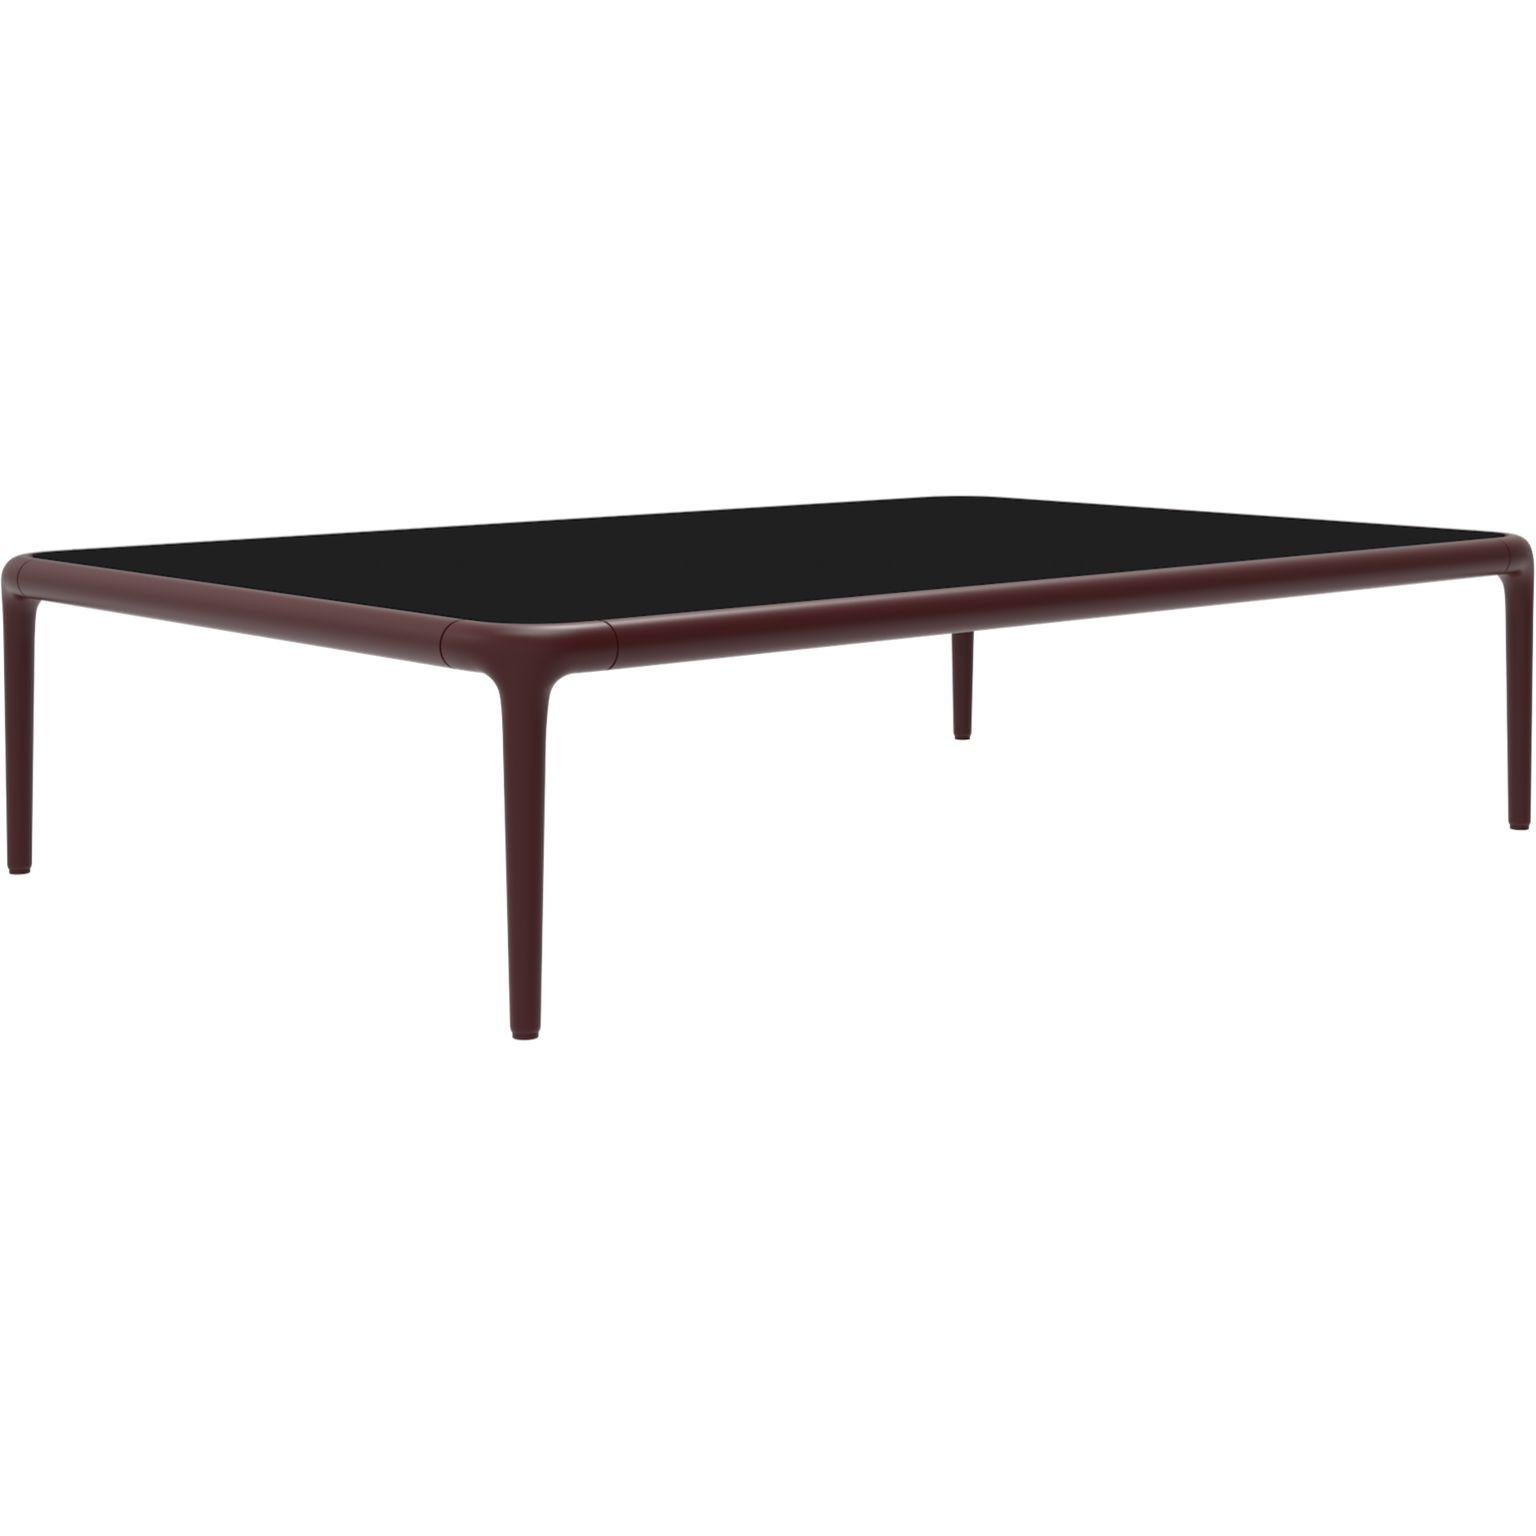 Xaloc Burgundy coffee table 120 with glass top by MOWEE
Dimensions: D120 x W80 x H28 cm
Materials: Aluminum, tinted tempered glass top.
Also available in different aluminum colors and finishes (HPL Black Edge or Neolith). 

Xaloc synthesizes